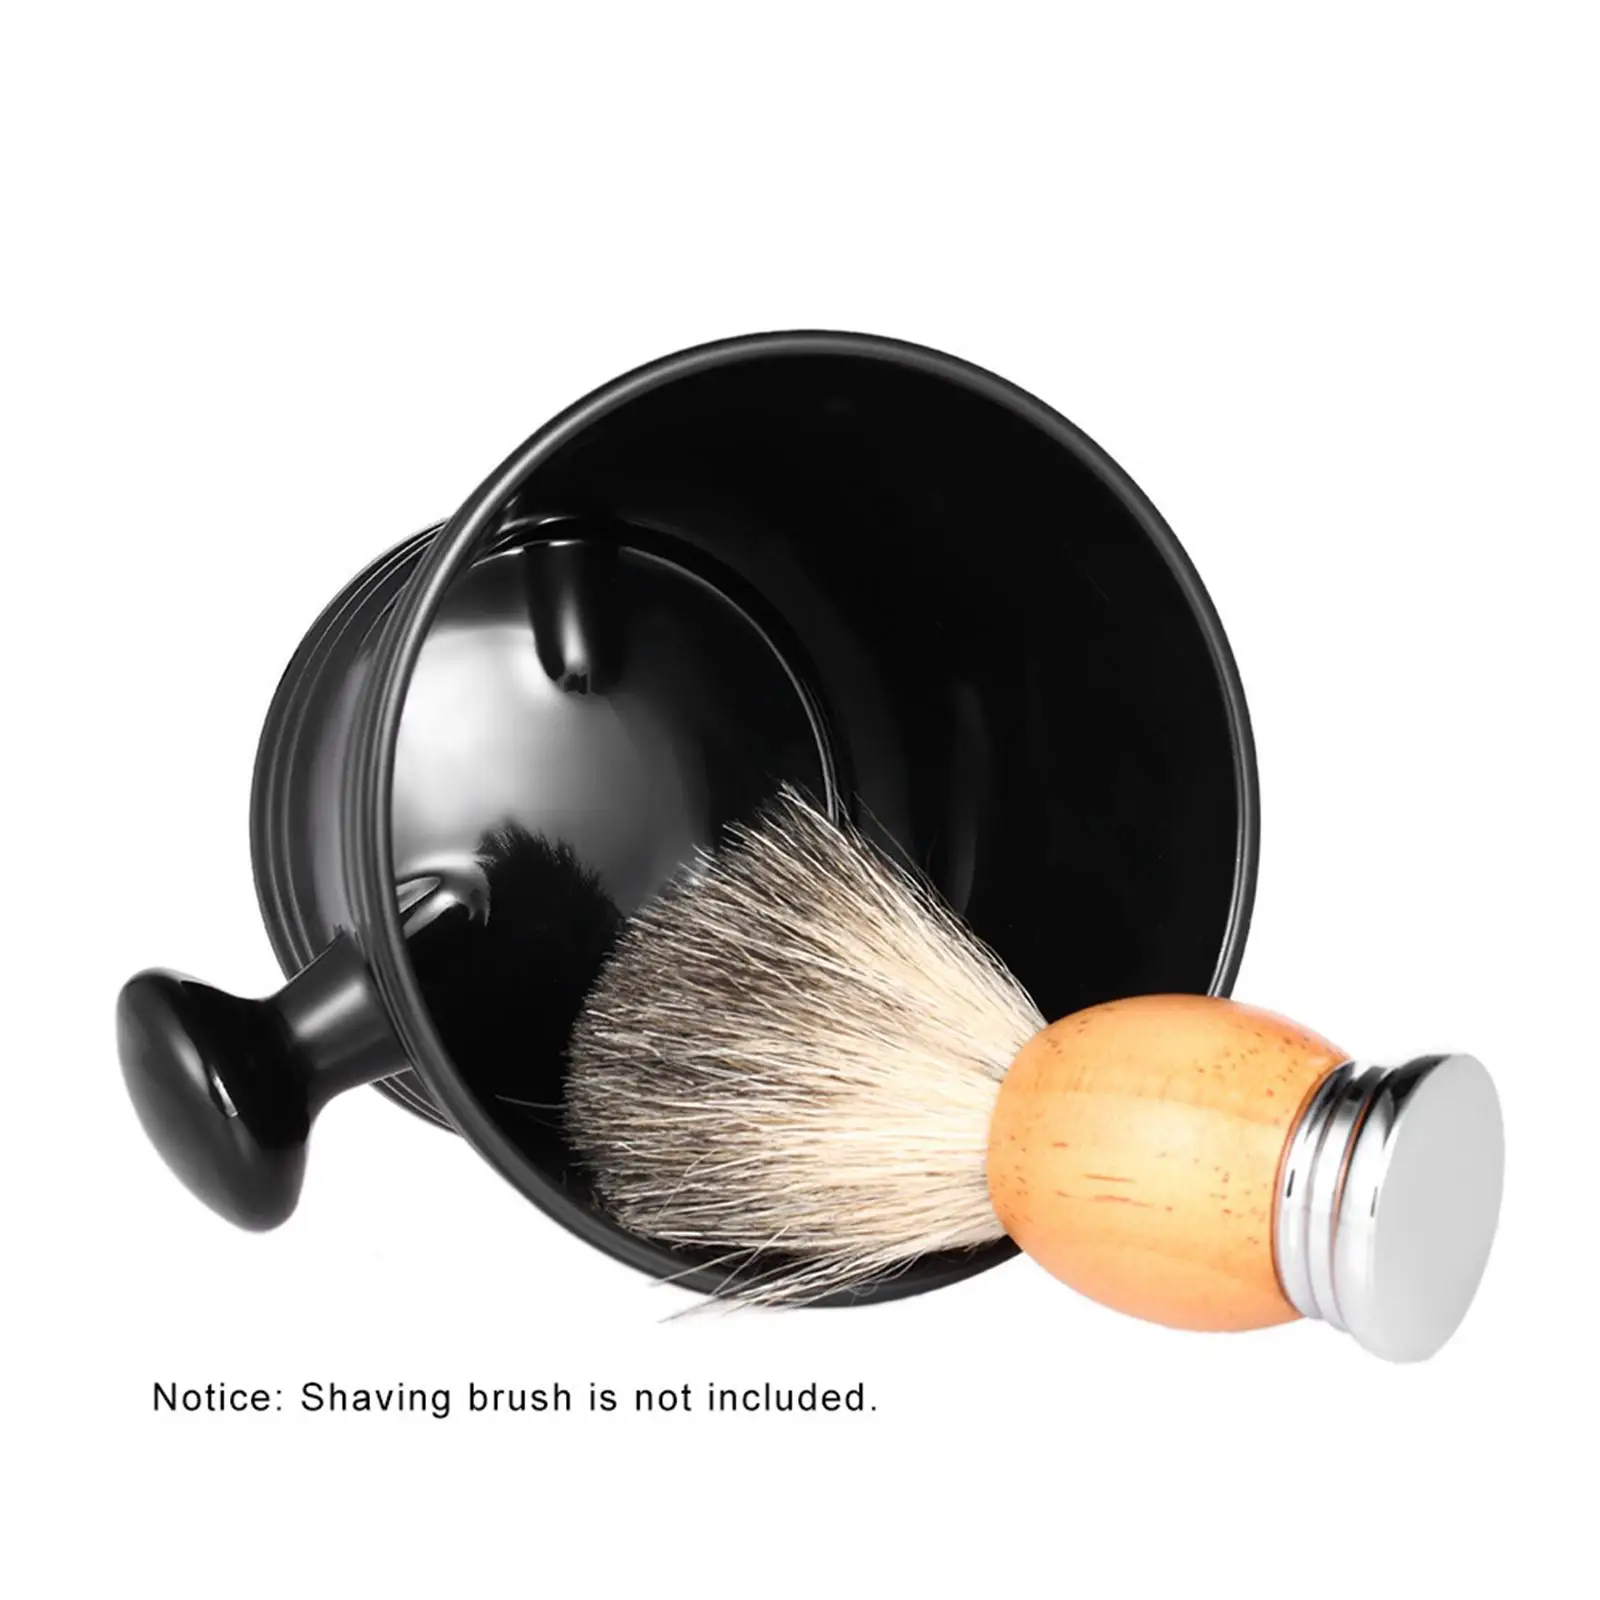 Modern Shaving Mug with Knob Handle Gifts PP Wide Mouth Soap Cream Bowl Barber Cleaning Soap Cup Beard Shaving Tools